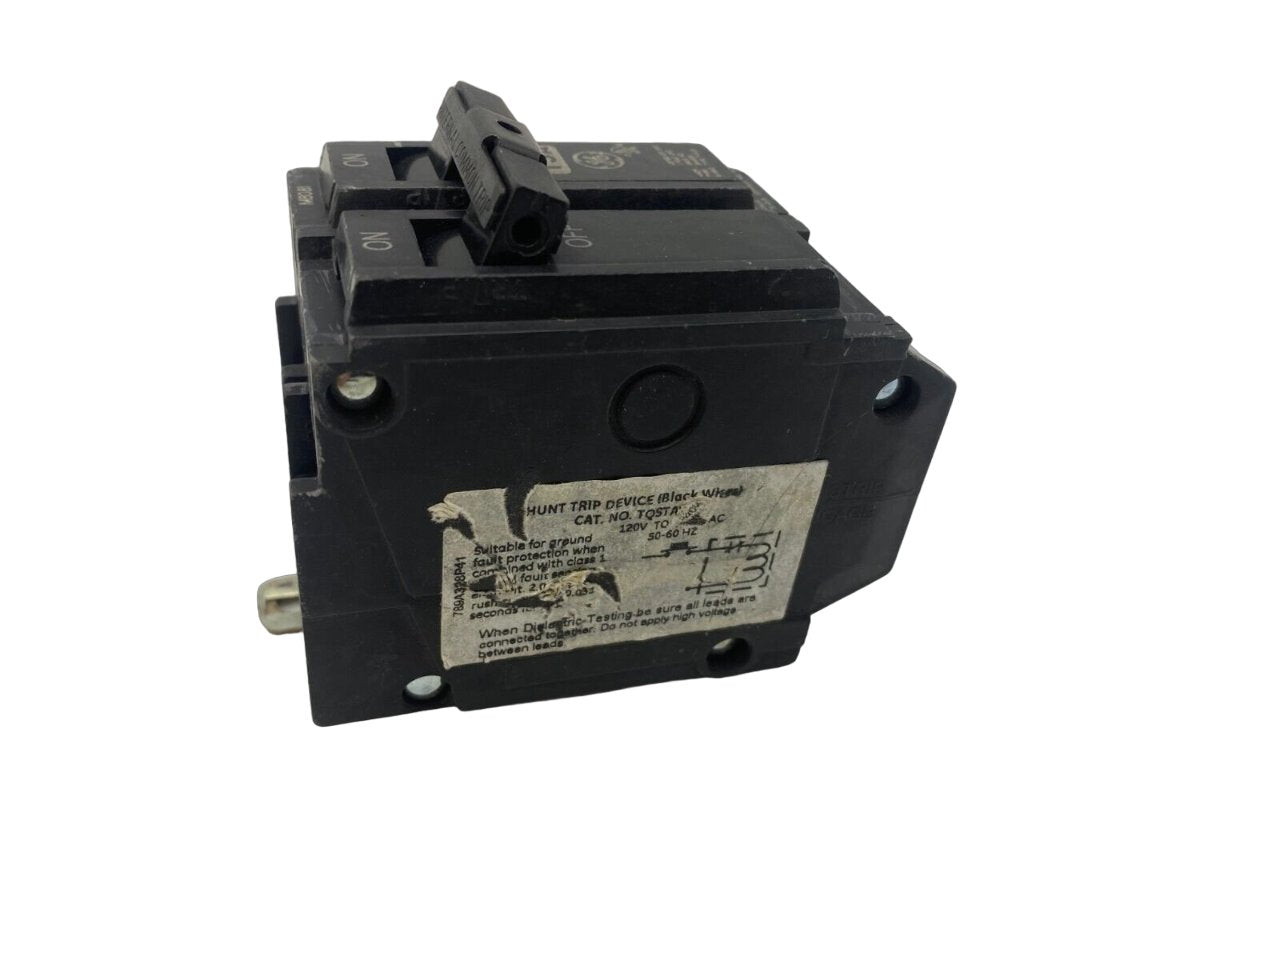 THHQB1115ST1 - General Electrics - Molded Case Circuit Breakers